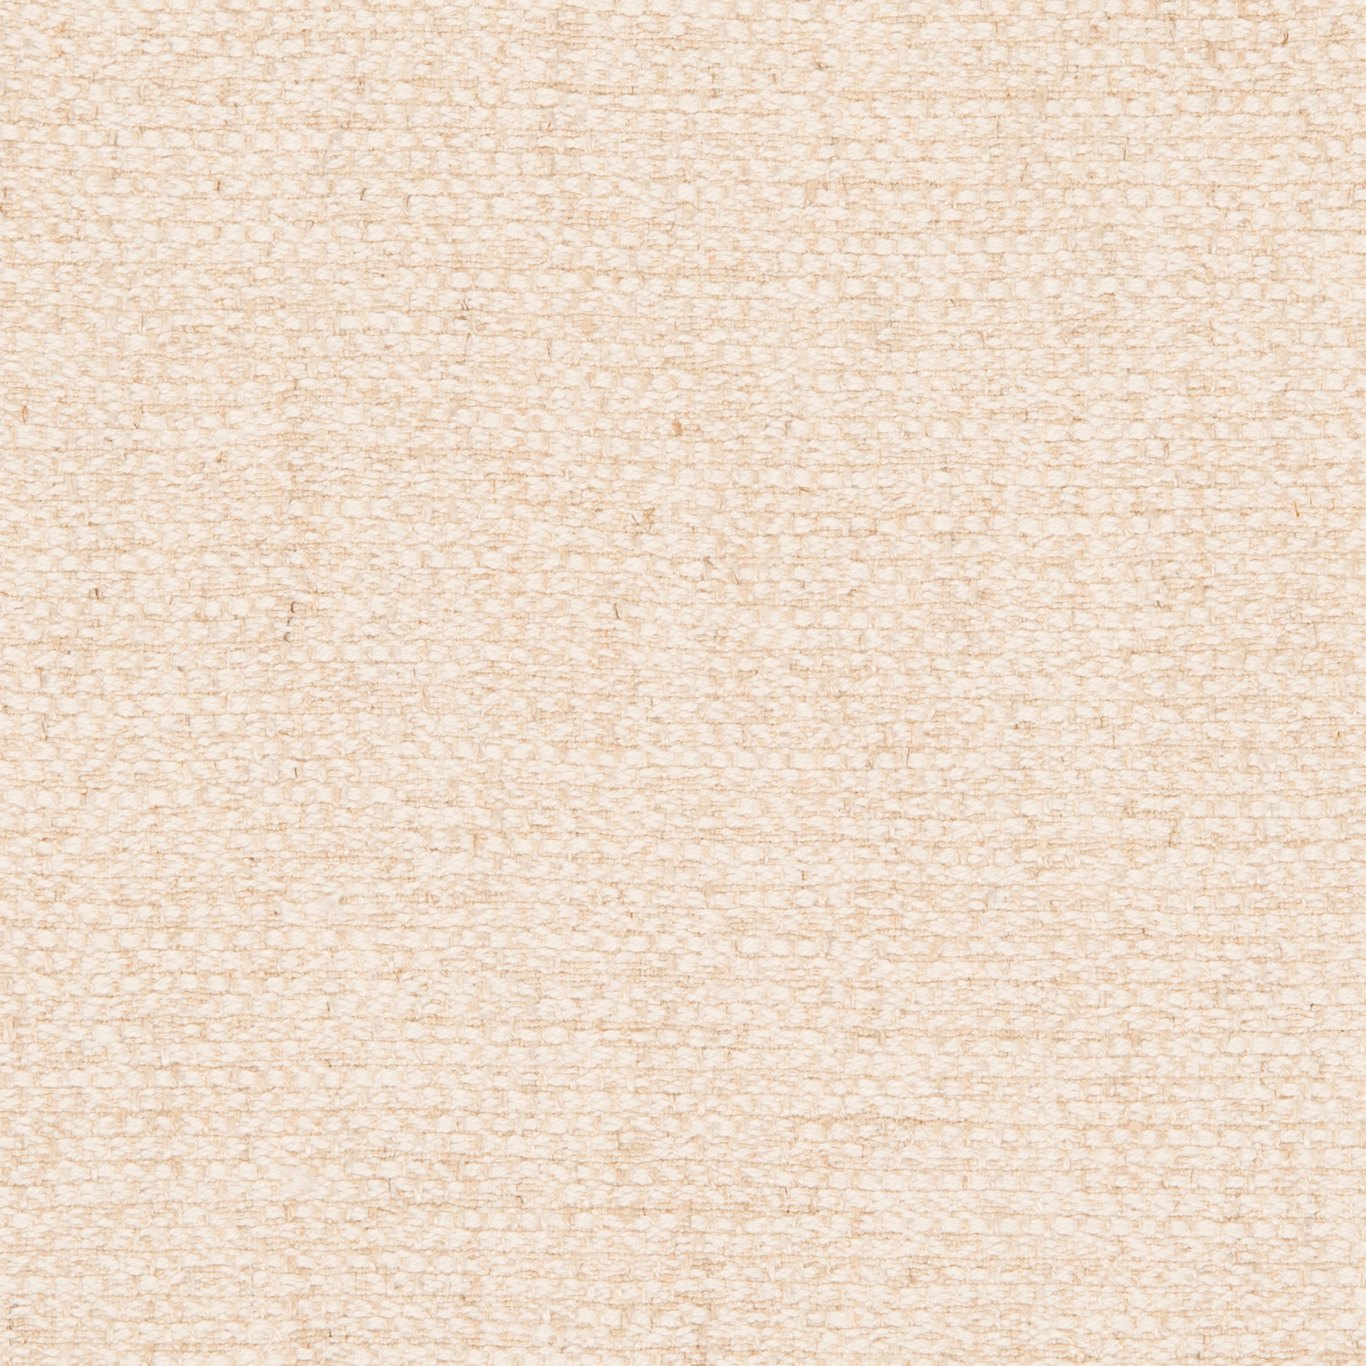 Angus Fabric by Clarke & Clarke - F0581/04 - Natural